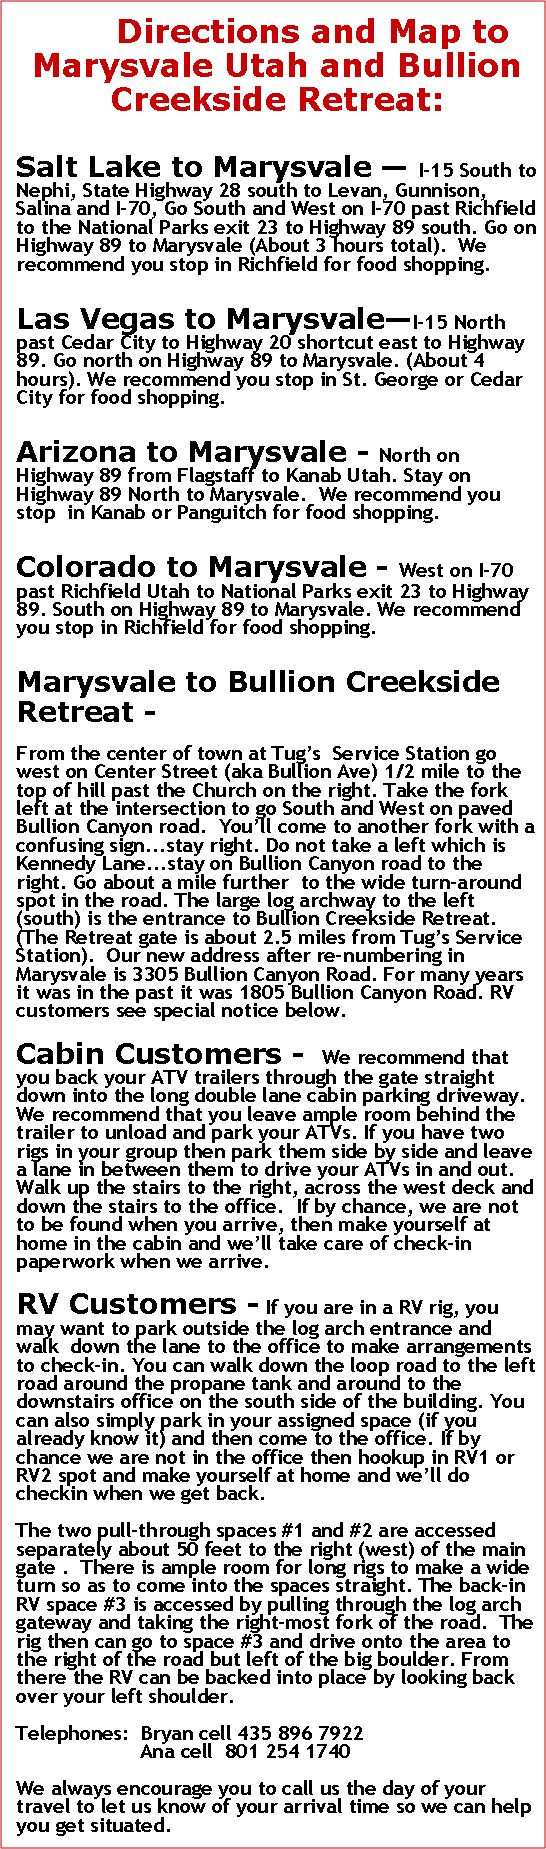 Text Box: Directions and Map to Marysvale Utah and Bullion Creekside Retreat:Salt Lake to Marysvale  I-15 South to Nephi, State Highway 28 south to Levan, Gunnison, Salina and I-70, Go South and West on I-70 past Richfield to the National Parks exit 23 to Highway 89 south. Go on Highway 89 to Marysvale (About 3 hours total).  We recommend you stop in Richfield for food shopping.Las Vegas to MarysvaleI-15 North past Cedar City to Highway 20 shortcut east to Highway 89. Go north on Highway 89 to Marysvale. (About 4 hours). We recommend you stop in St. George or Cedar City for food shopping.Arizona to Marysvale - North on Highway 89 from Flagstaff to Kanab Utah. Stay on Highway 89 North to Marysvale.  We recommend you stop  in Kanab or Panguitch for food shopping.Colorado to Marysvale - West on I-70 past Richfield Utah to National Parks exit 23 to Highway 89. South on Highway 89 to Marysvale. We recommend you stop in Richfield for food shopping.Marysvale to Bullion Creekside Retreat -From the center of town at Tugs  Service Station go west on Center Street (aka Bullion Ave) 1/2 mile to the top of hill past the Church on the right. Take the fork left at the intersection to go South and West on paved Bullion Canyon road.  Youll come to another fork with a confusing sign...stay right. Do not take a left which is Kennedy Lane...stay on Bullion Canyon road to the right. Go about a mile further  to the wide turn-around spot in the road. The large log archway to the left (south) is the entrance to Bullion Creekside Retreat. (The Retreat gate is about 2.5 miles from Tugs Service Station).  Our new address after re-numbering in Marysvale is 3305 Bullion Canyon Road. For many years it was in the past it was 1805 Bullion Canyon Road. RV customers see special notice below.Cabin Customers -   We recommend that you back your ATV trailers through the gate straight down into the long double lane cabin parking driveway. We recommend that you leave ample room behind the trailer to unload and park your ATVs. If you have two rigs in your group then park them side by side and leave a lane in between them to drive your ATVs in and out.  Walk up the stairs to the right, across the west deck and down the stairs to the office.  If by chance, we are not to be found when you arrive, then make yourself at home in the cabin and well take care of check-in paperwork when we arrive.RV Customers - If you are in a RV rig, you may want to park outside the log arch entrance and walk  down the lane to the office to make arrangements to check-in. You can walk down the loop road to the left road around the propane tank and around to the downstairs office on the south side of the building. You can also simply park in your assigned space (if you already know it) and then come to the office. If by chance we are not in the office then hookup in RV1 or RV2 spot and make yourself at home and well do checkin when we get back.The two pull-through spaces #1 and #2 are accessed separately about 50 feet to the right (west) of the main gate .  There is ample room for long rigs to make a wide turn so as to come into the spaces straight. The back-in RV space #3 is accessed by pulling through the log arch gateway and taking the right-most fork of the road.  The rig then can go to space #3 and drive onto the area to the right of the road but left of the big boulder. From there the RV can be backed into place by looking back over your left shoulder.Telephones:  Bryan cell 435 896 7922                     Ana cell  801 254 1740We always encourage you to call us the day of your travel to let us know of your arrival time so we can help you get situated.